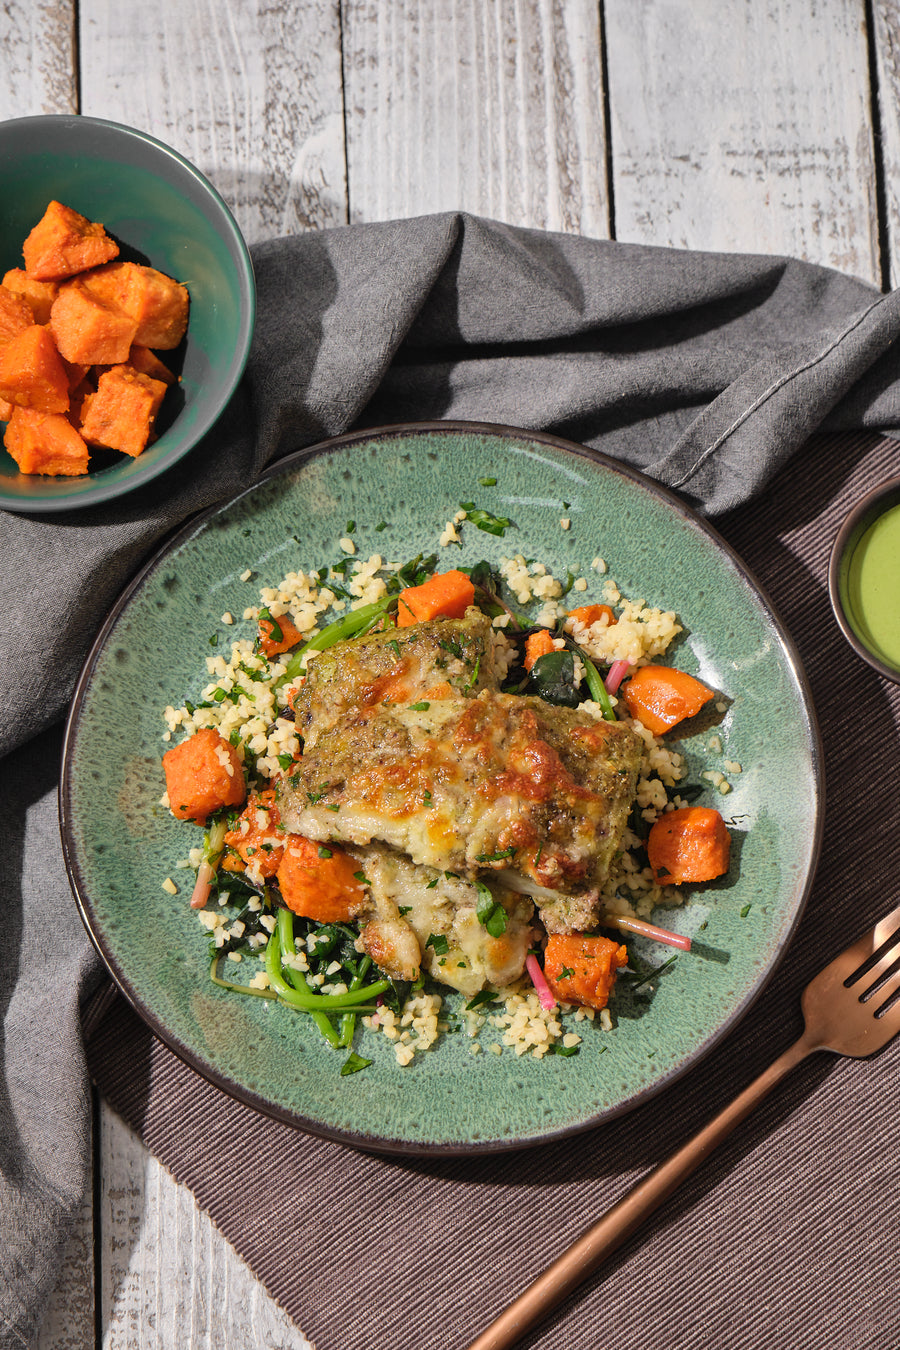 Herb Crusted Fish Fillet with Green Tahini Dressing, Spinach & Sweet Potato